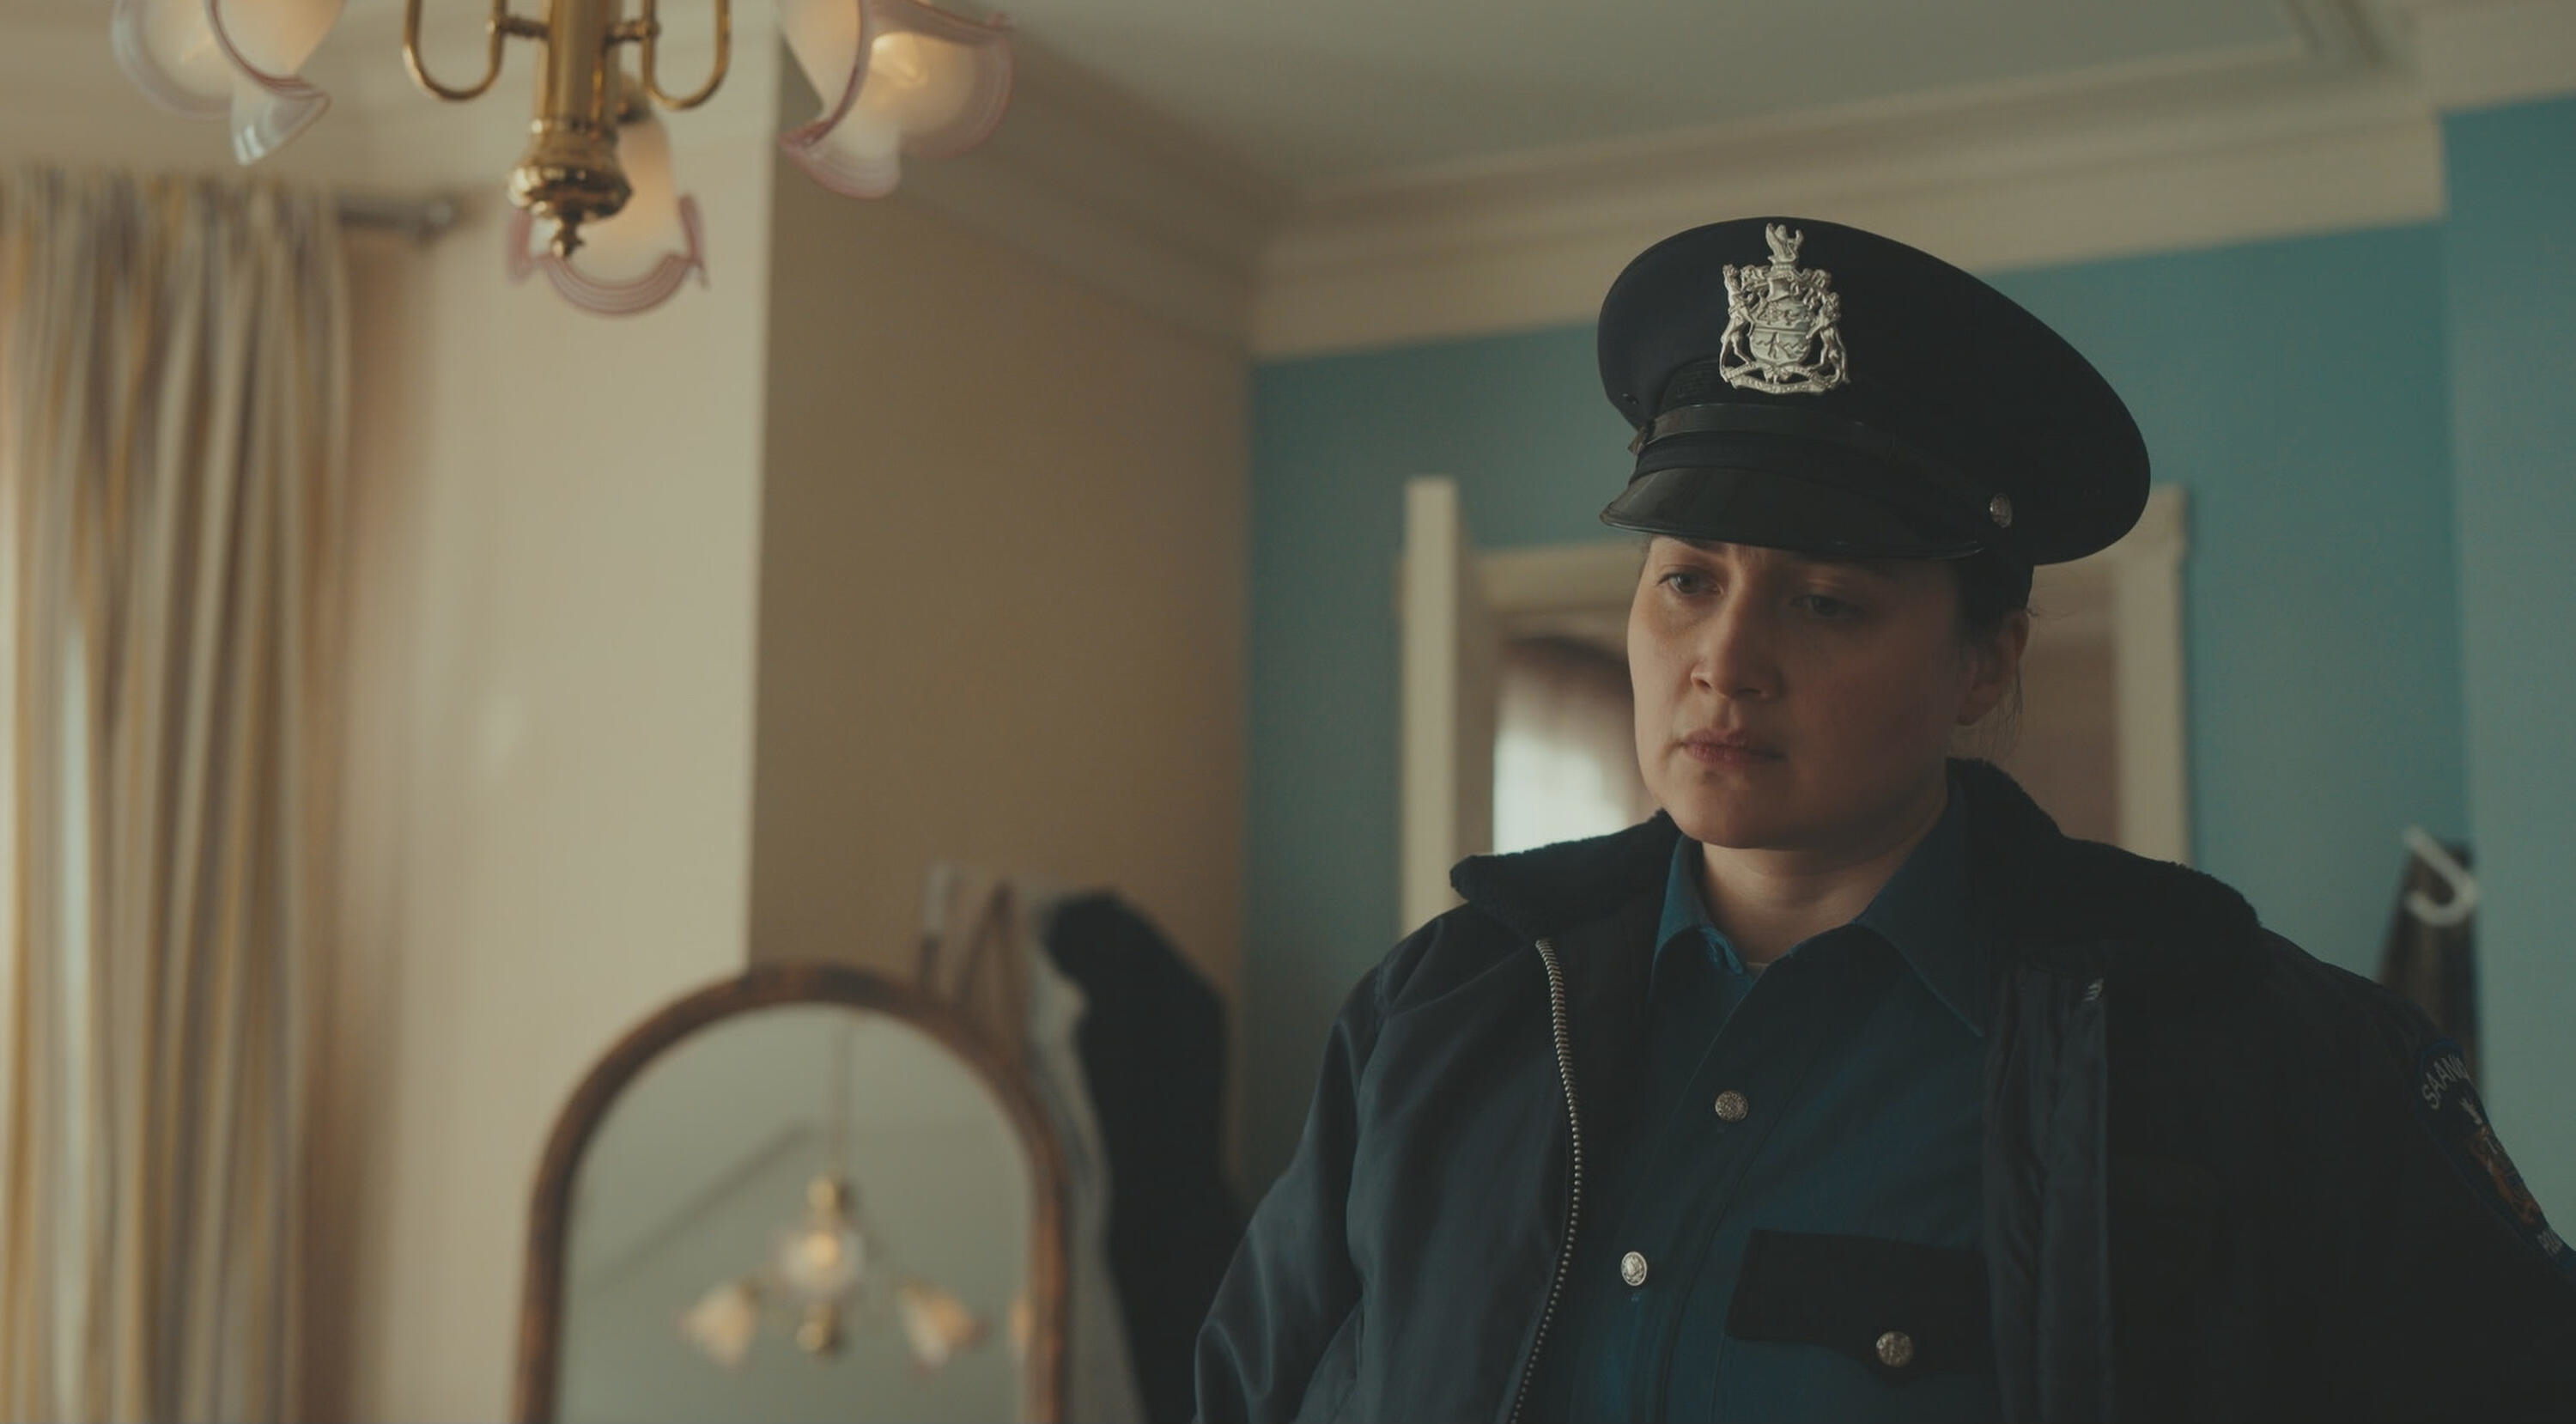 A uniformed police officer character appears concerned in a room; scene from a TV show